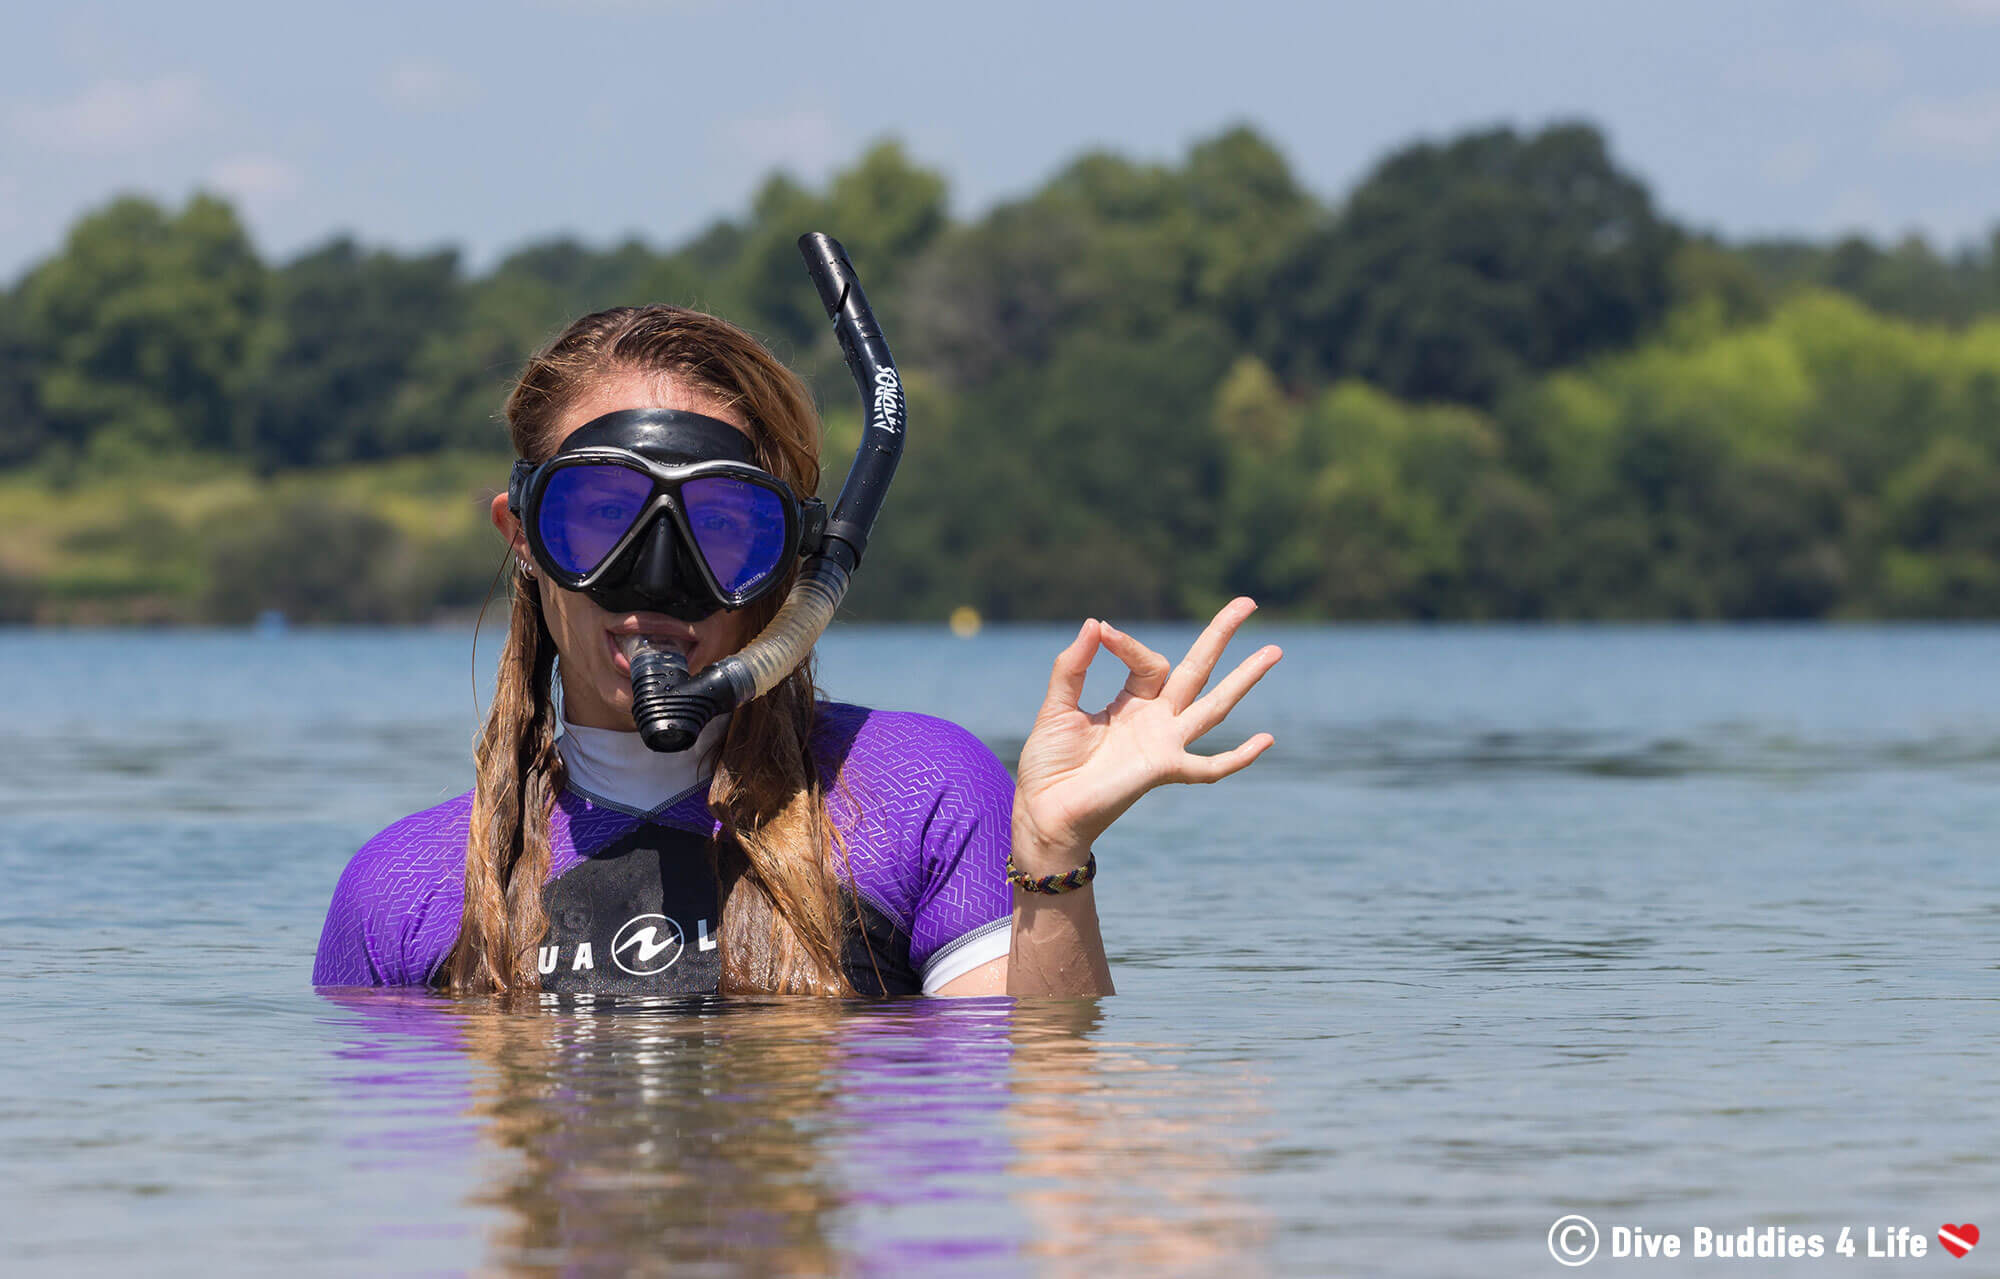 Ali Giving The Ok Scuba Sign In The Water 